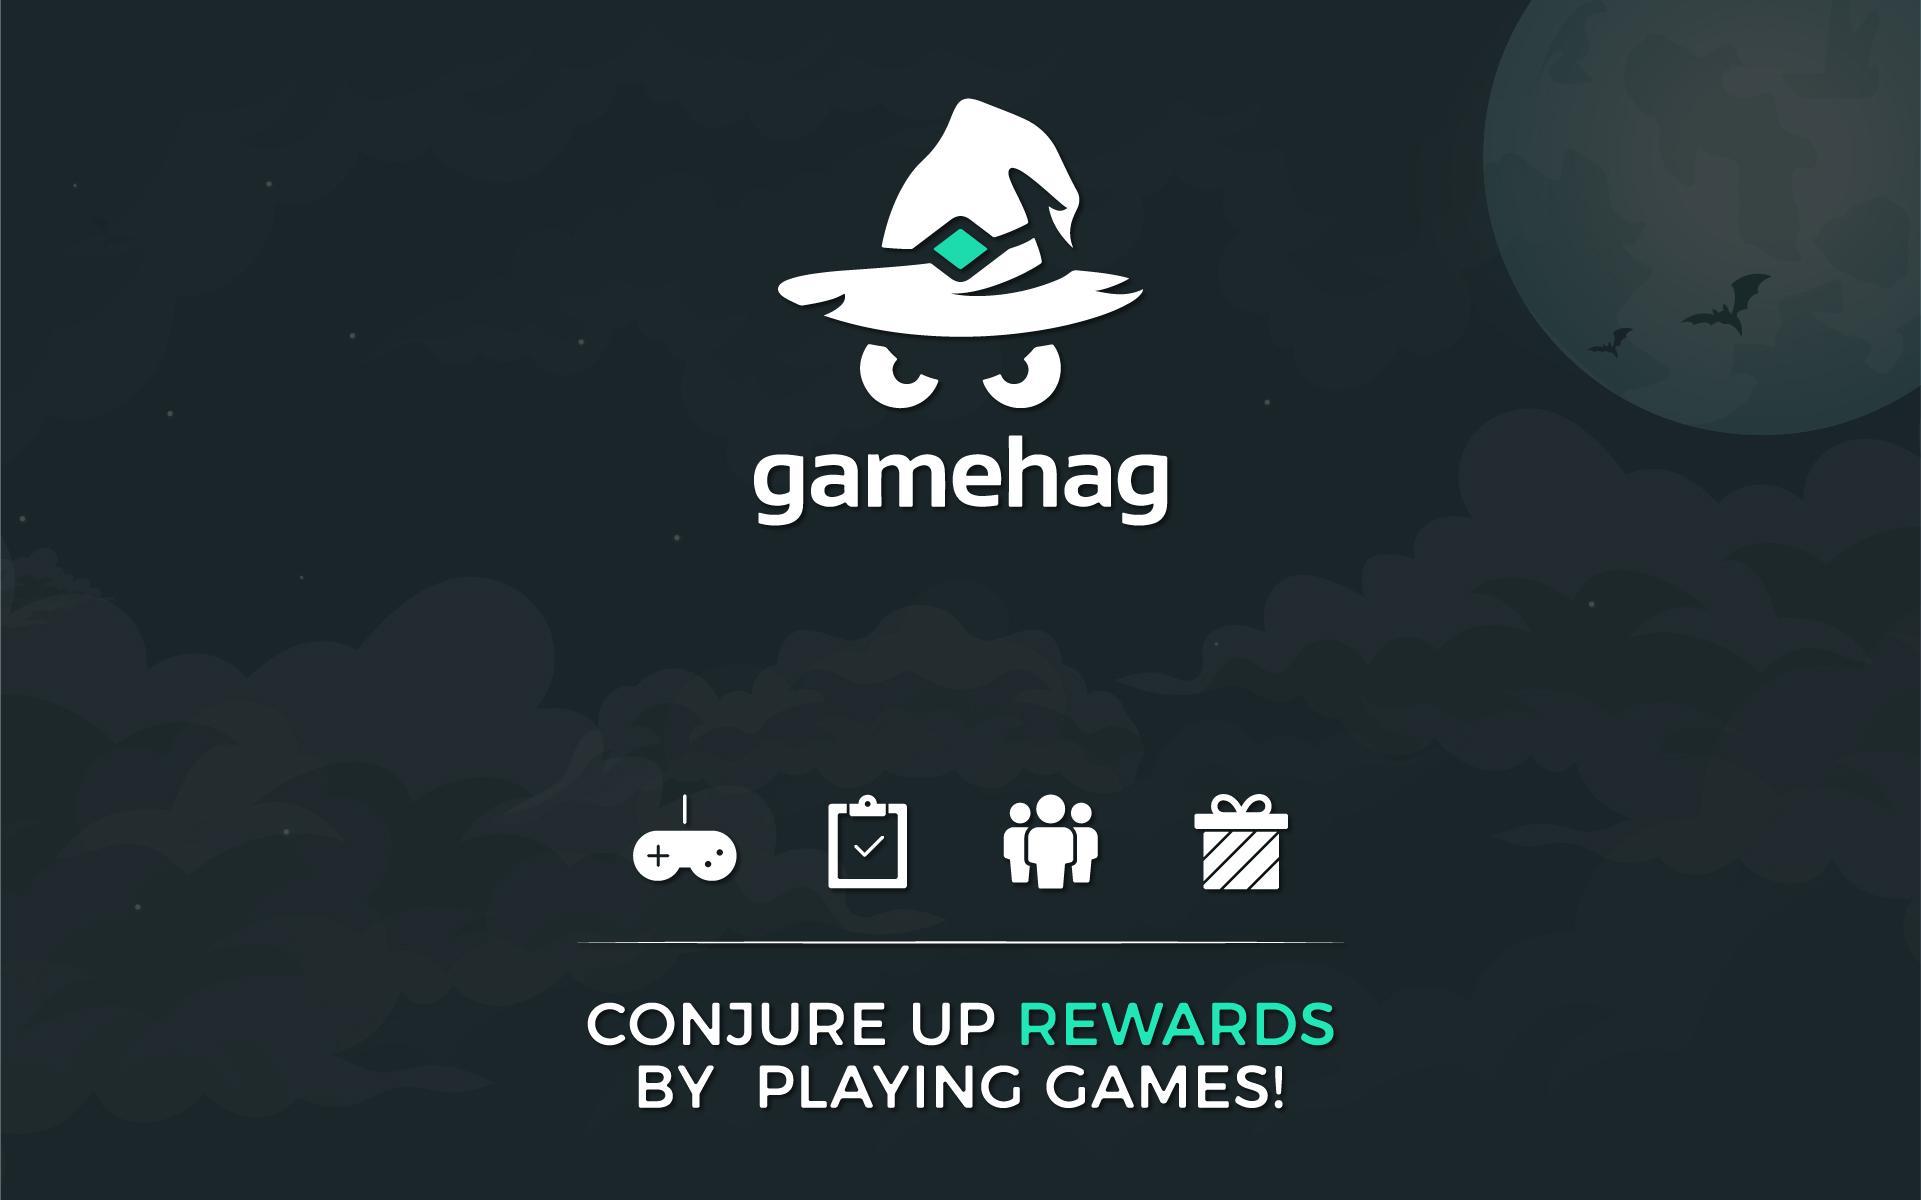 Gamehag for Android - APK Download - 1921 x 1200 jpeg 70kB